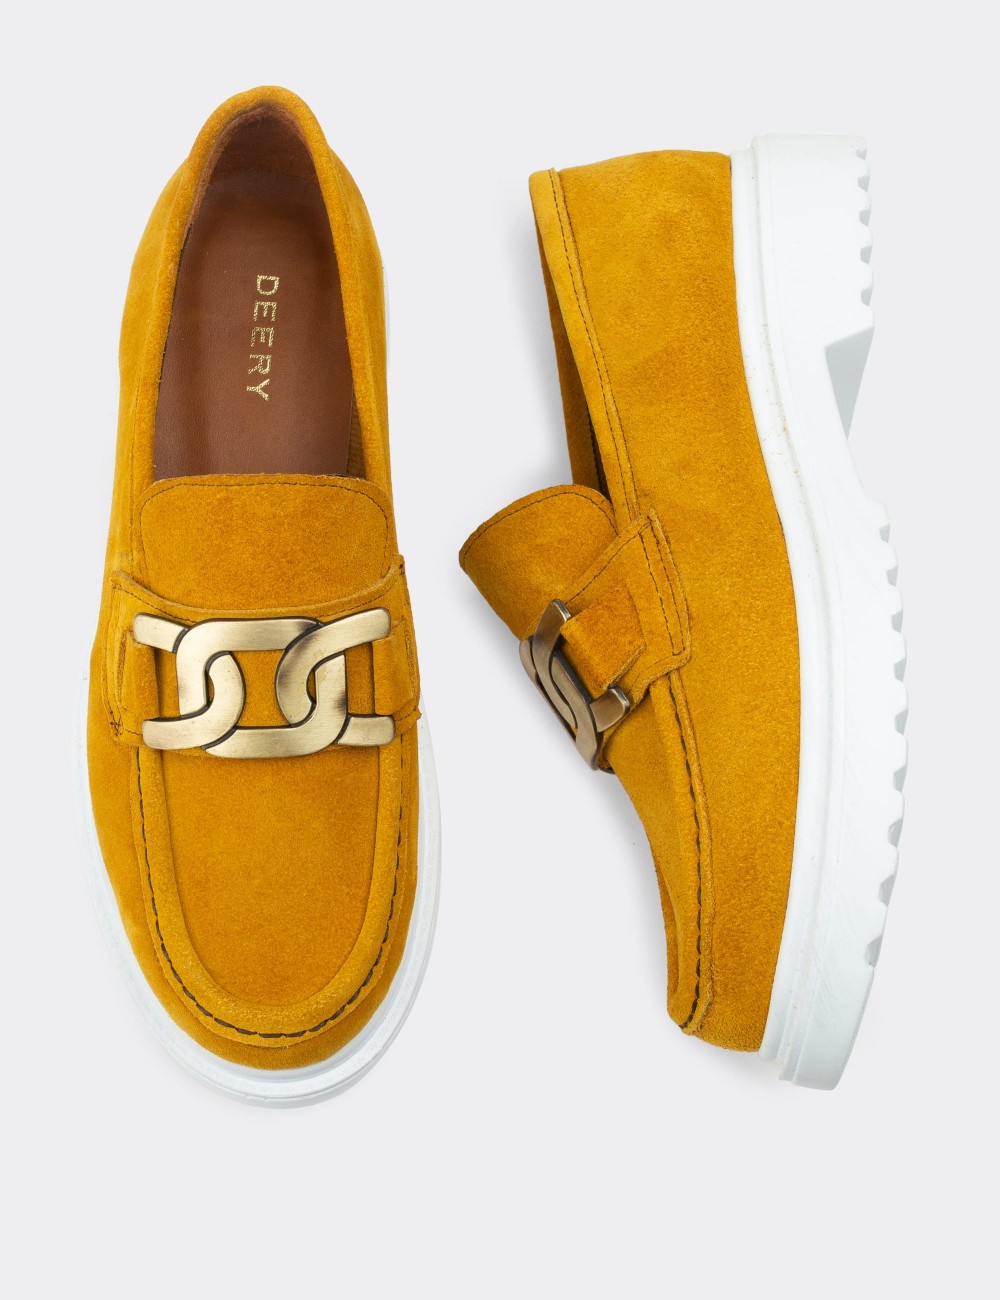 Yellow Suede Leather Loafers - 01902ZSRIP01